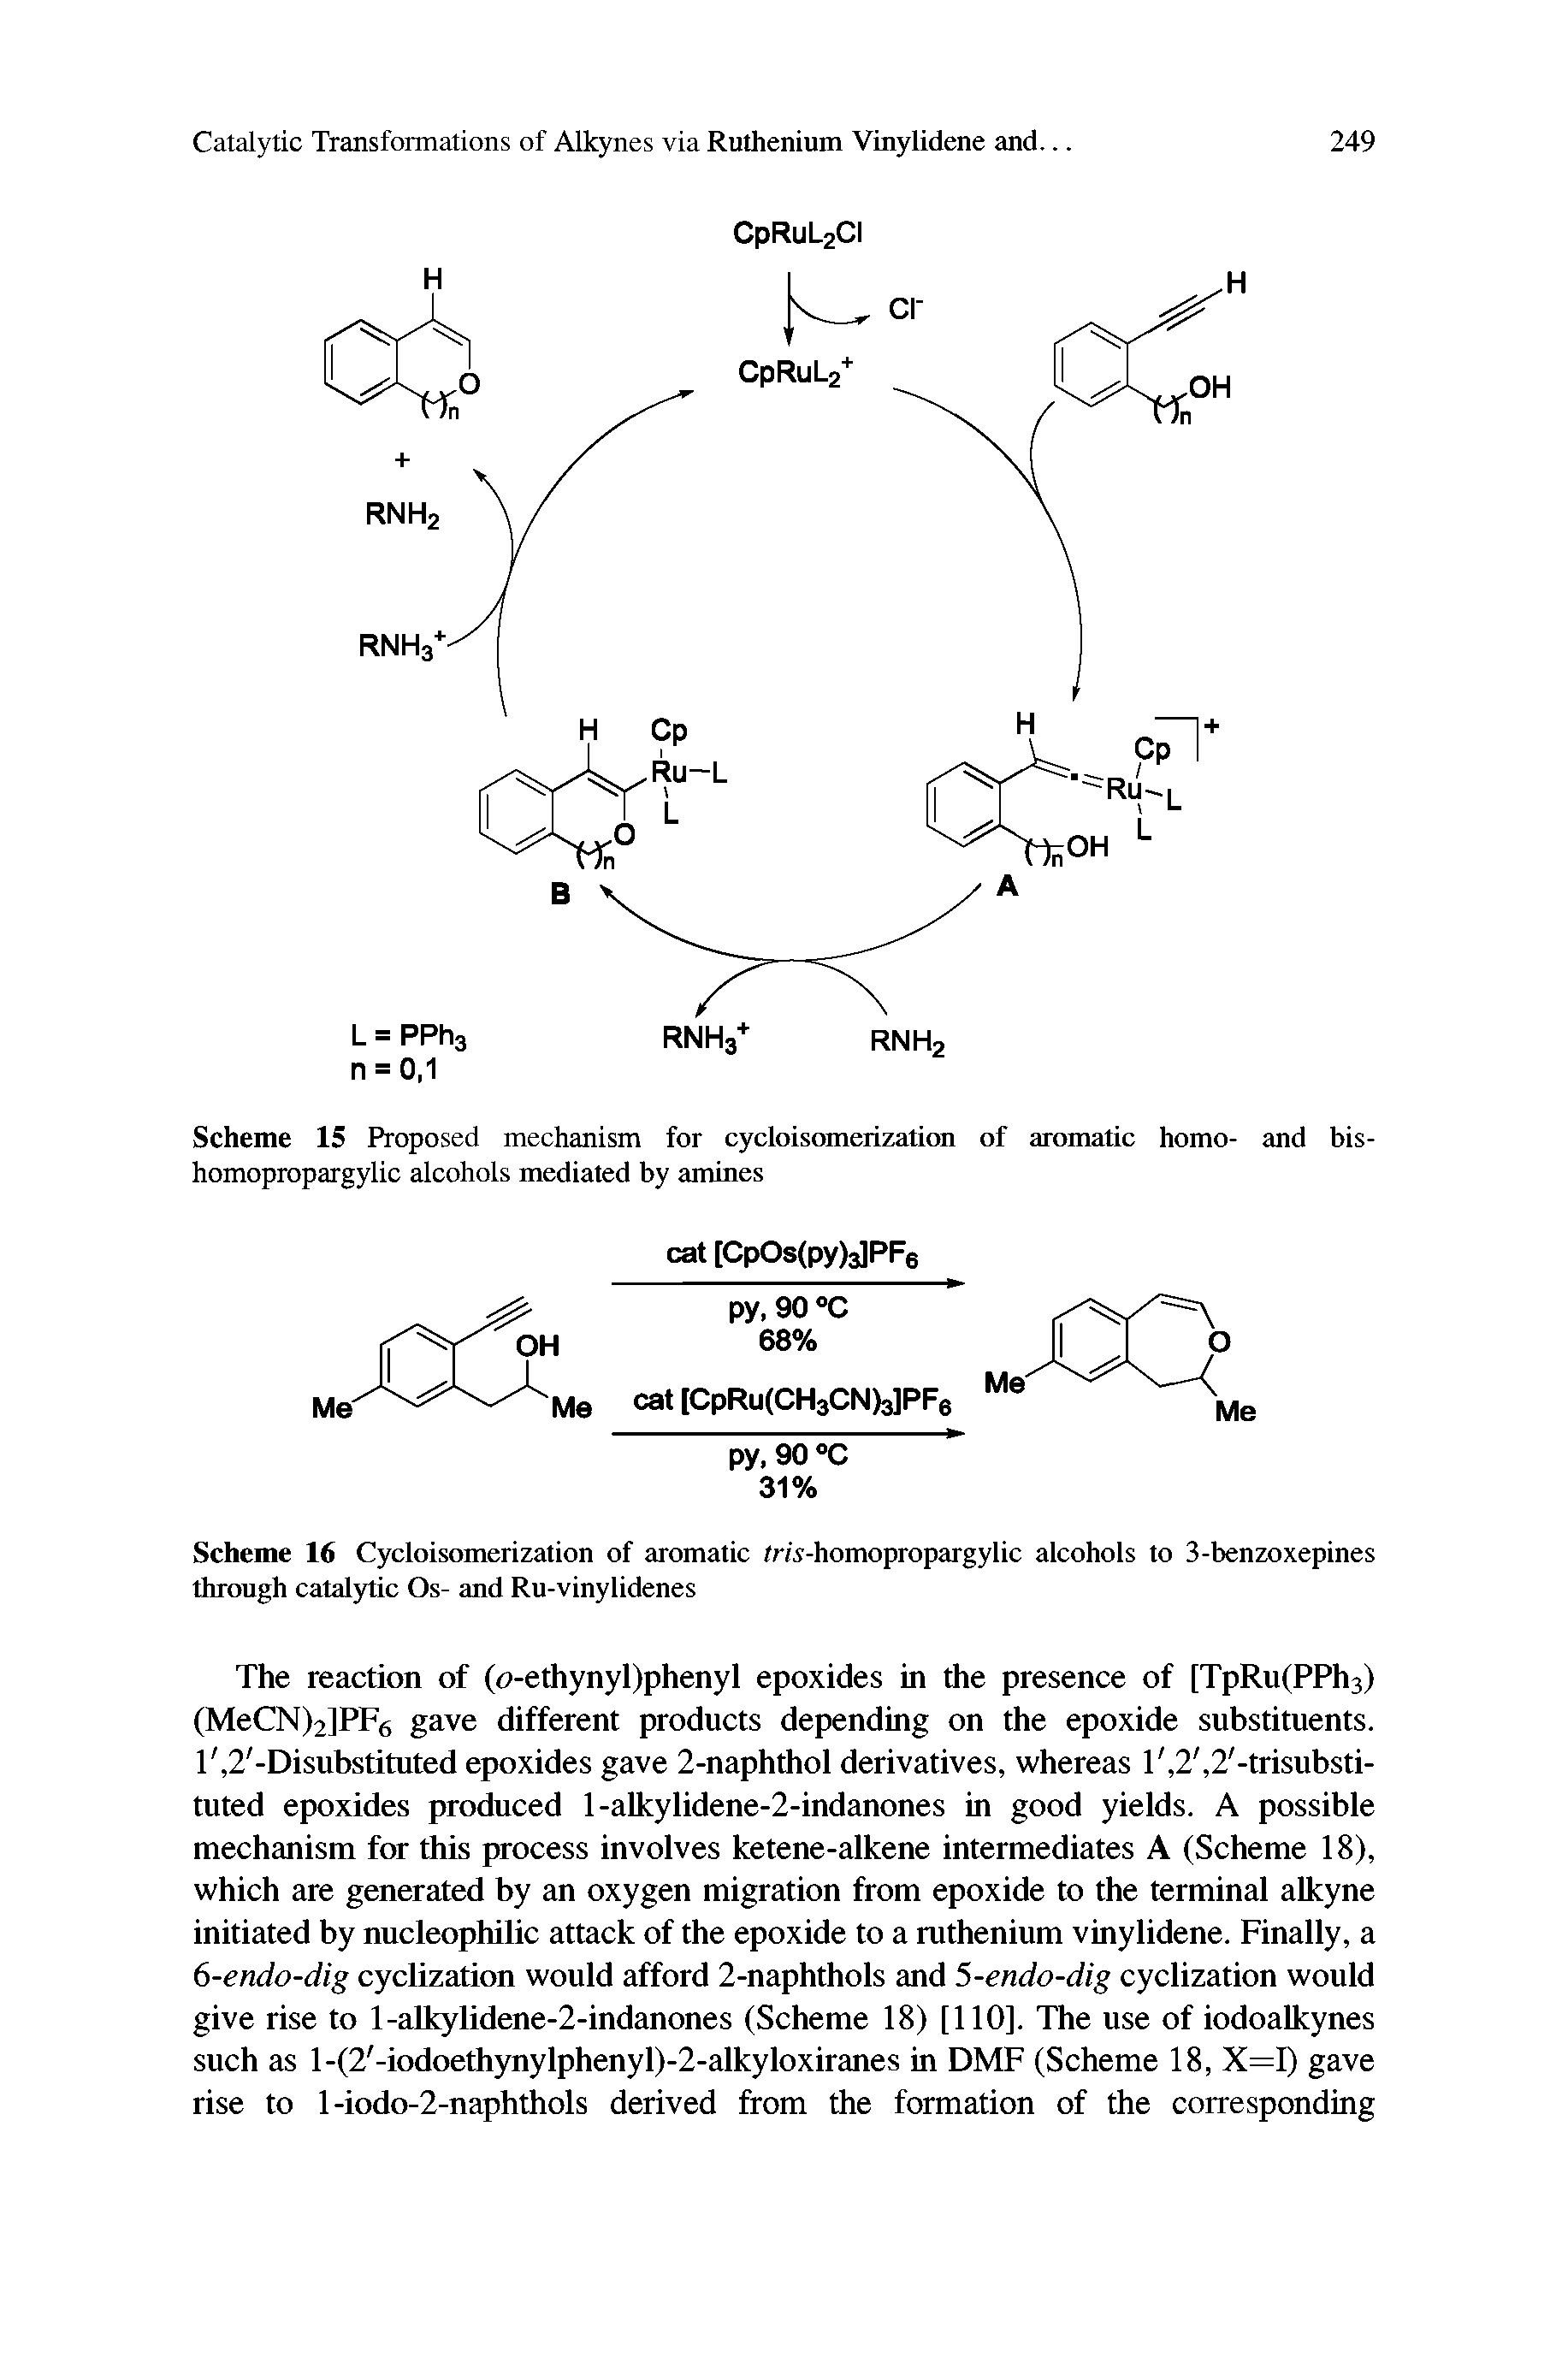 Scheme 15 Proposed mechanism for cycloisomerization of aromatic homo- and bis-homopropargylic alcohols mediated by amines...